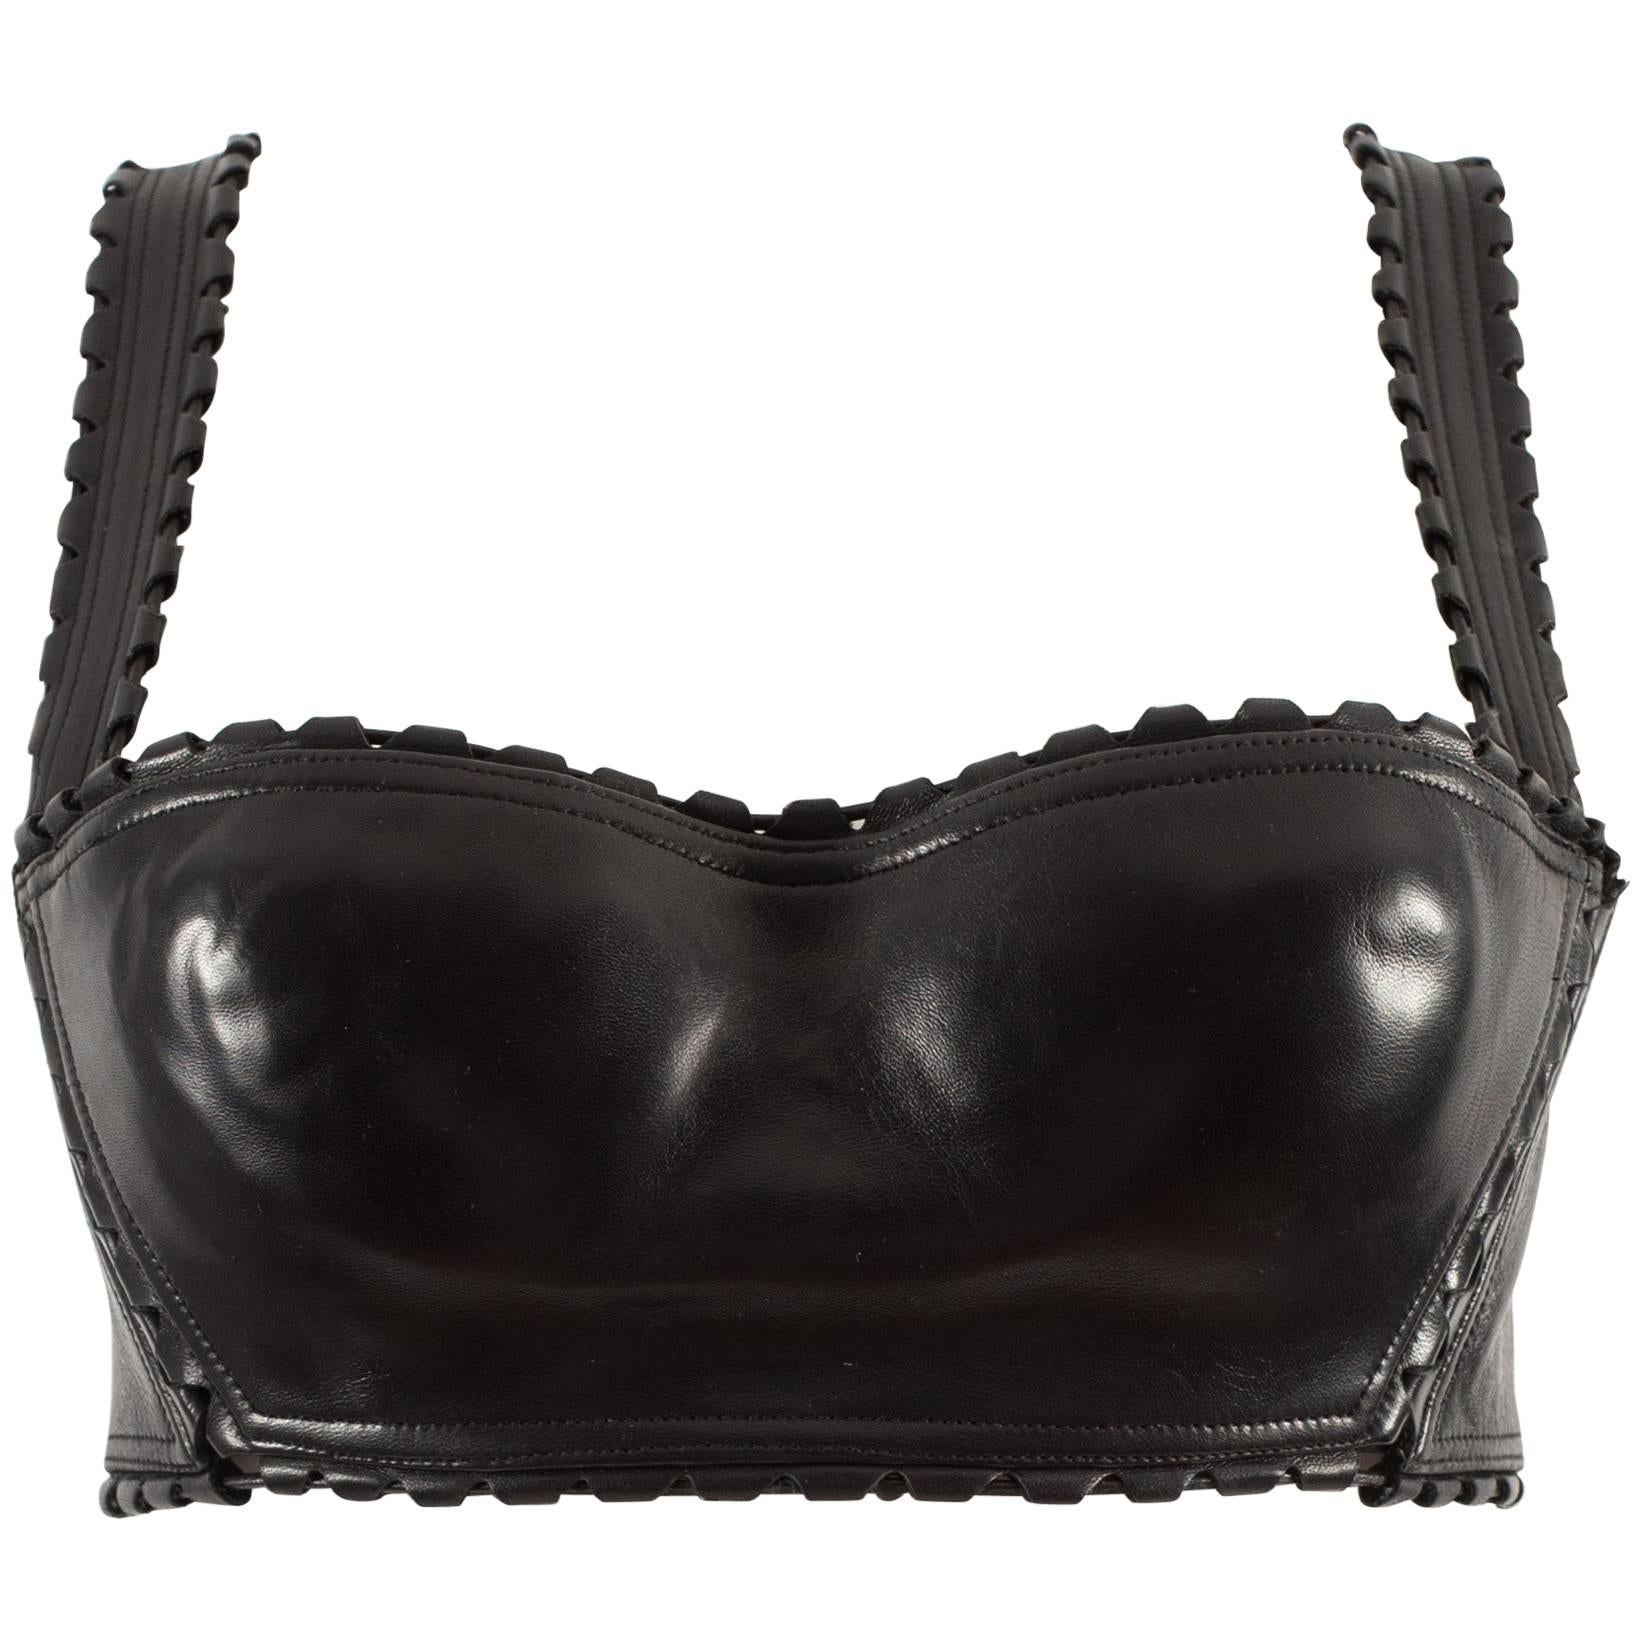 Alaia Spring-Summer 1992 black leather lace up bra